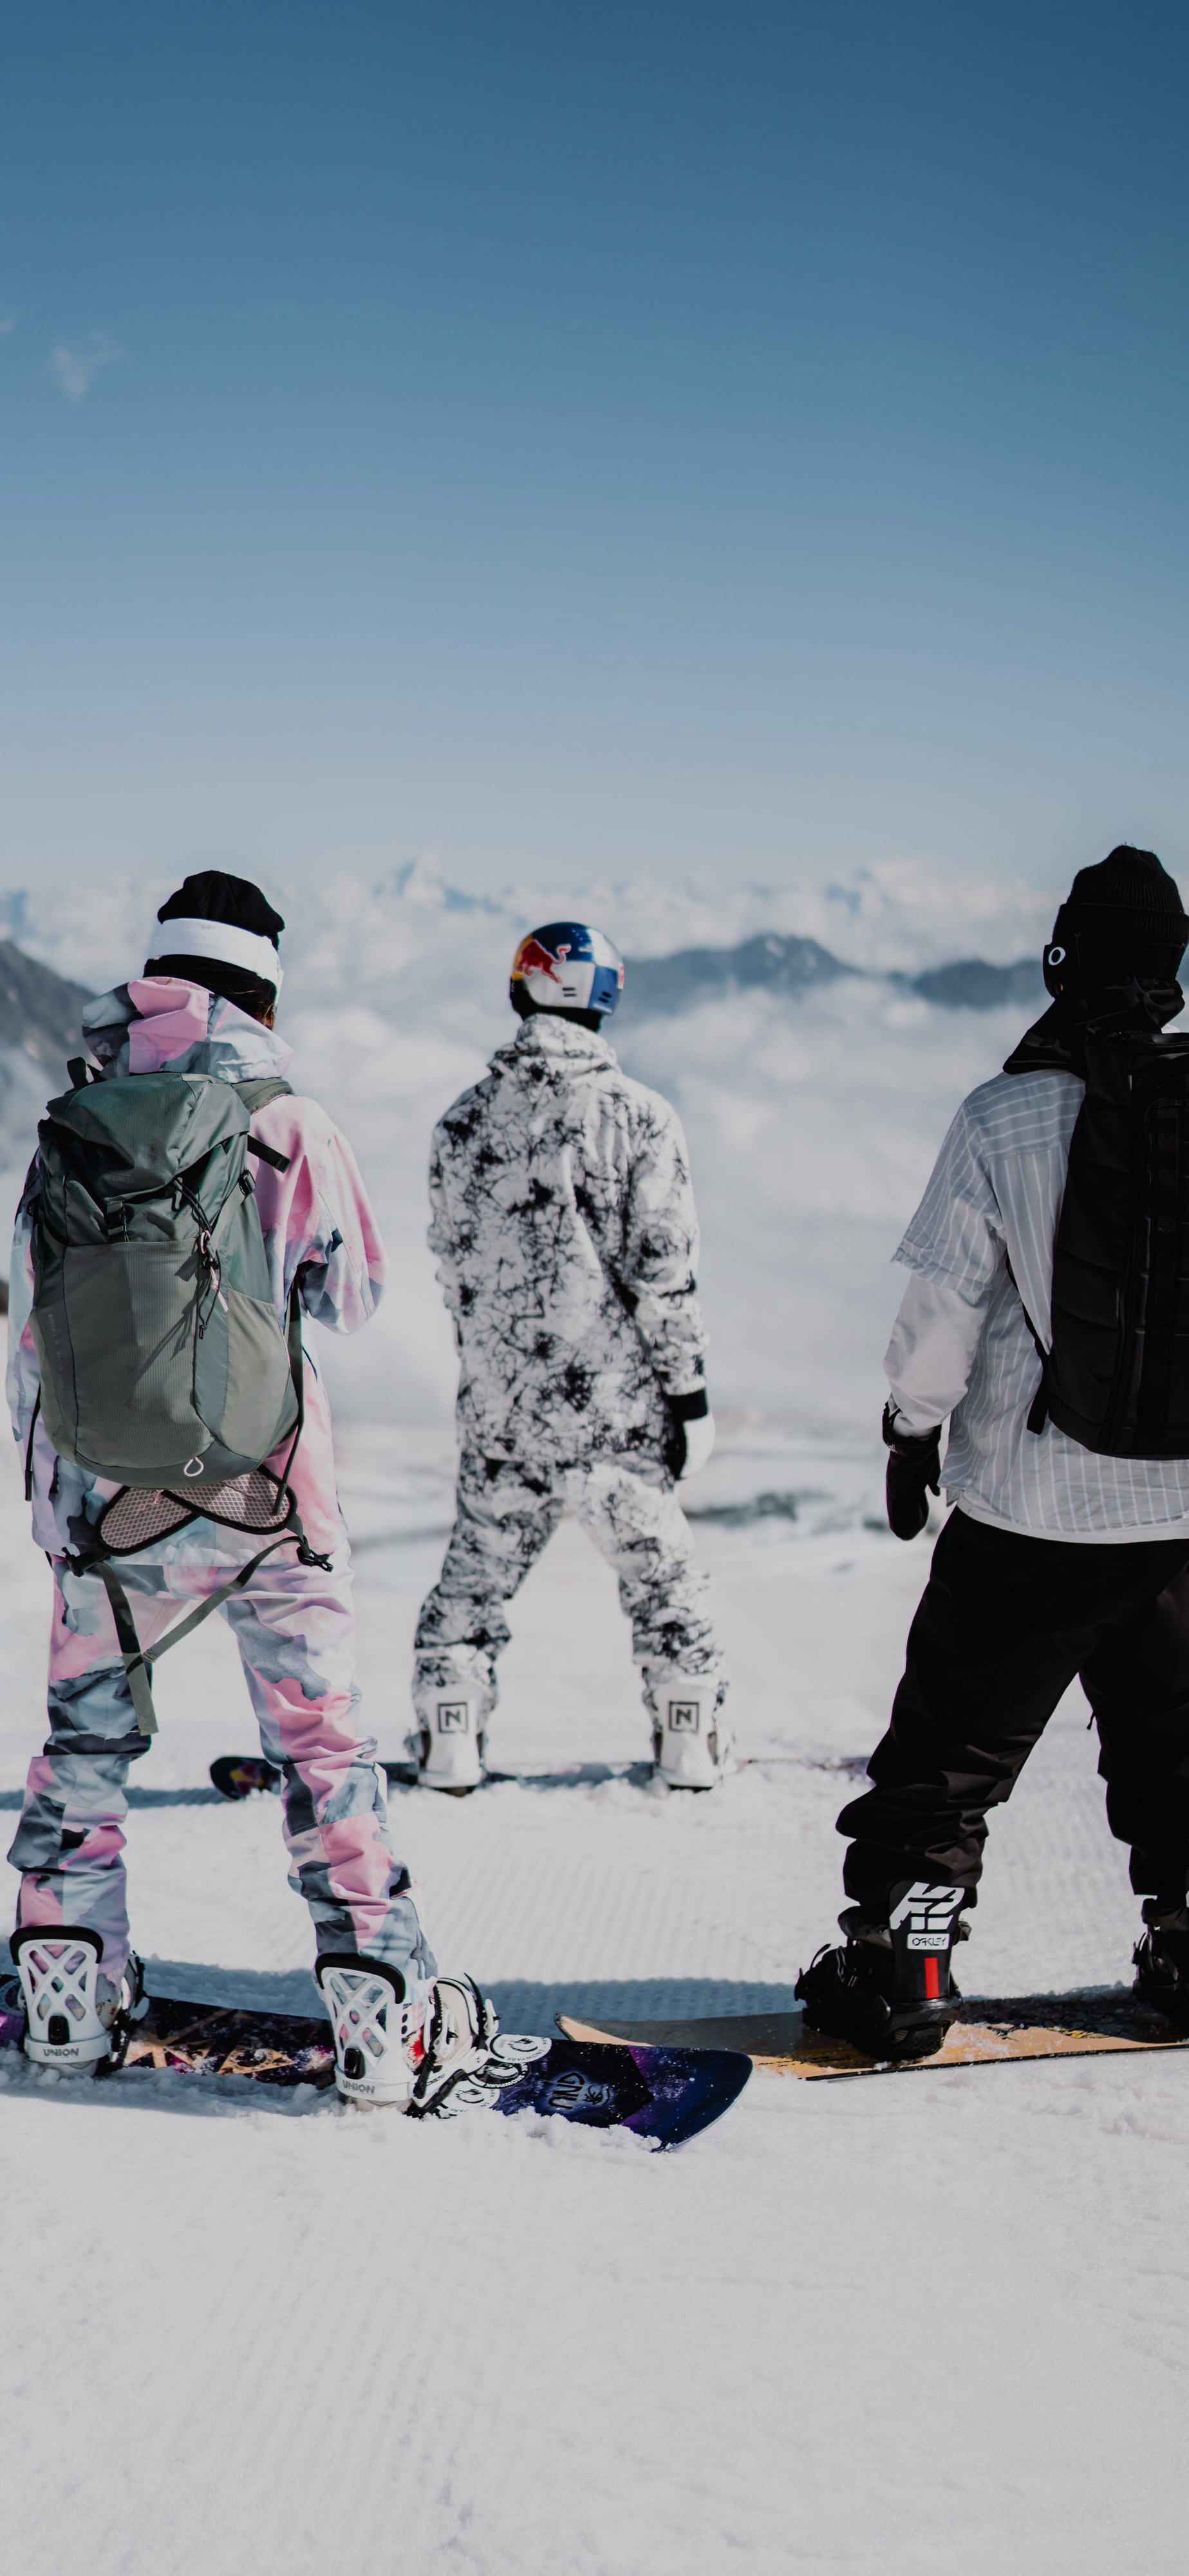 How are Dope Snow, Montec, and Ride Store related?